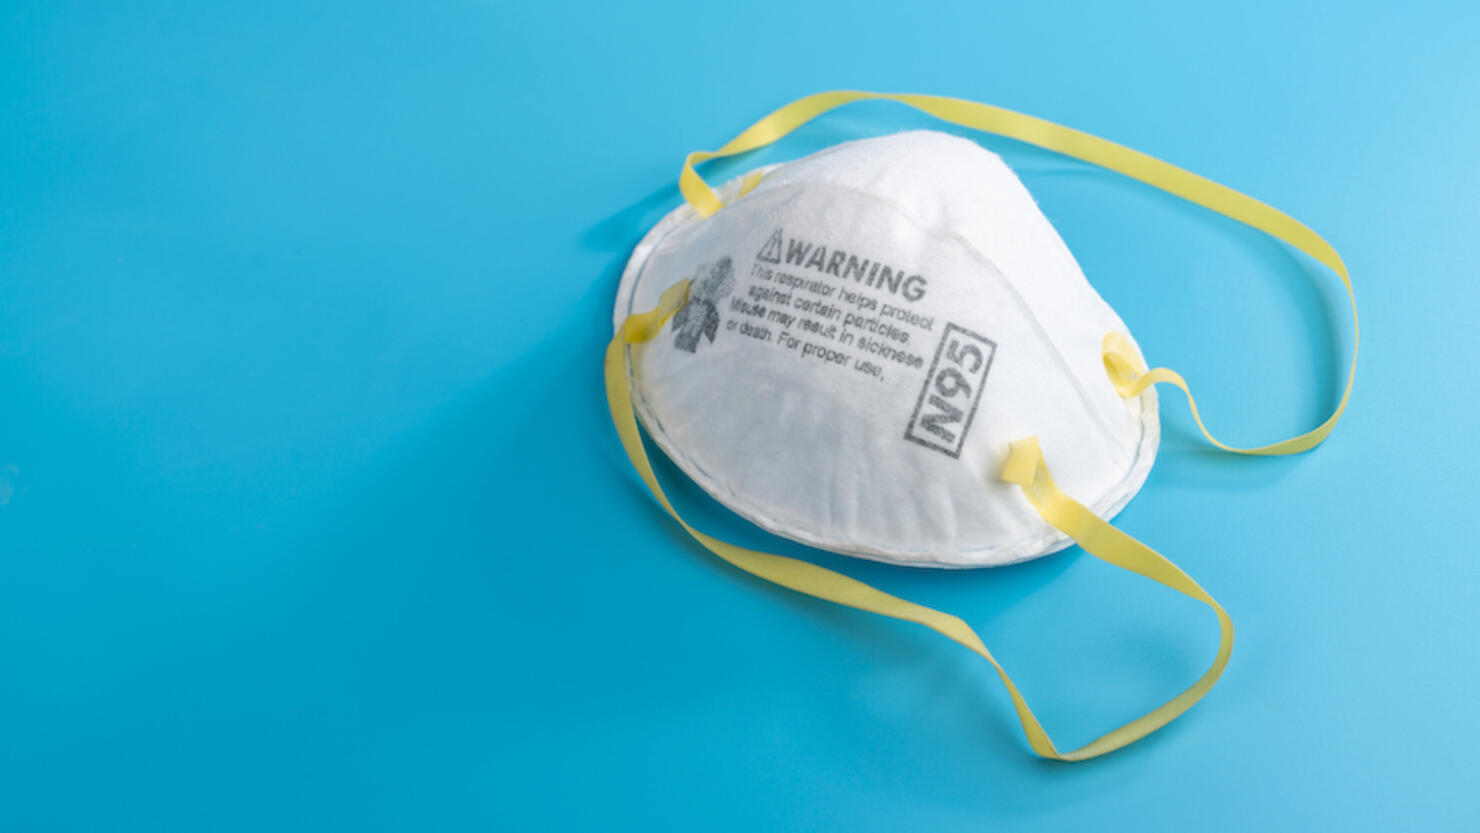 N95 Respirators and Surgical Masks (Face Masks). White medical mask isolate. Face mask protection against pollution, virus, flu and coronavirus. Health care and surgical concept.